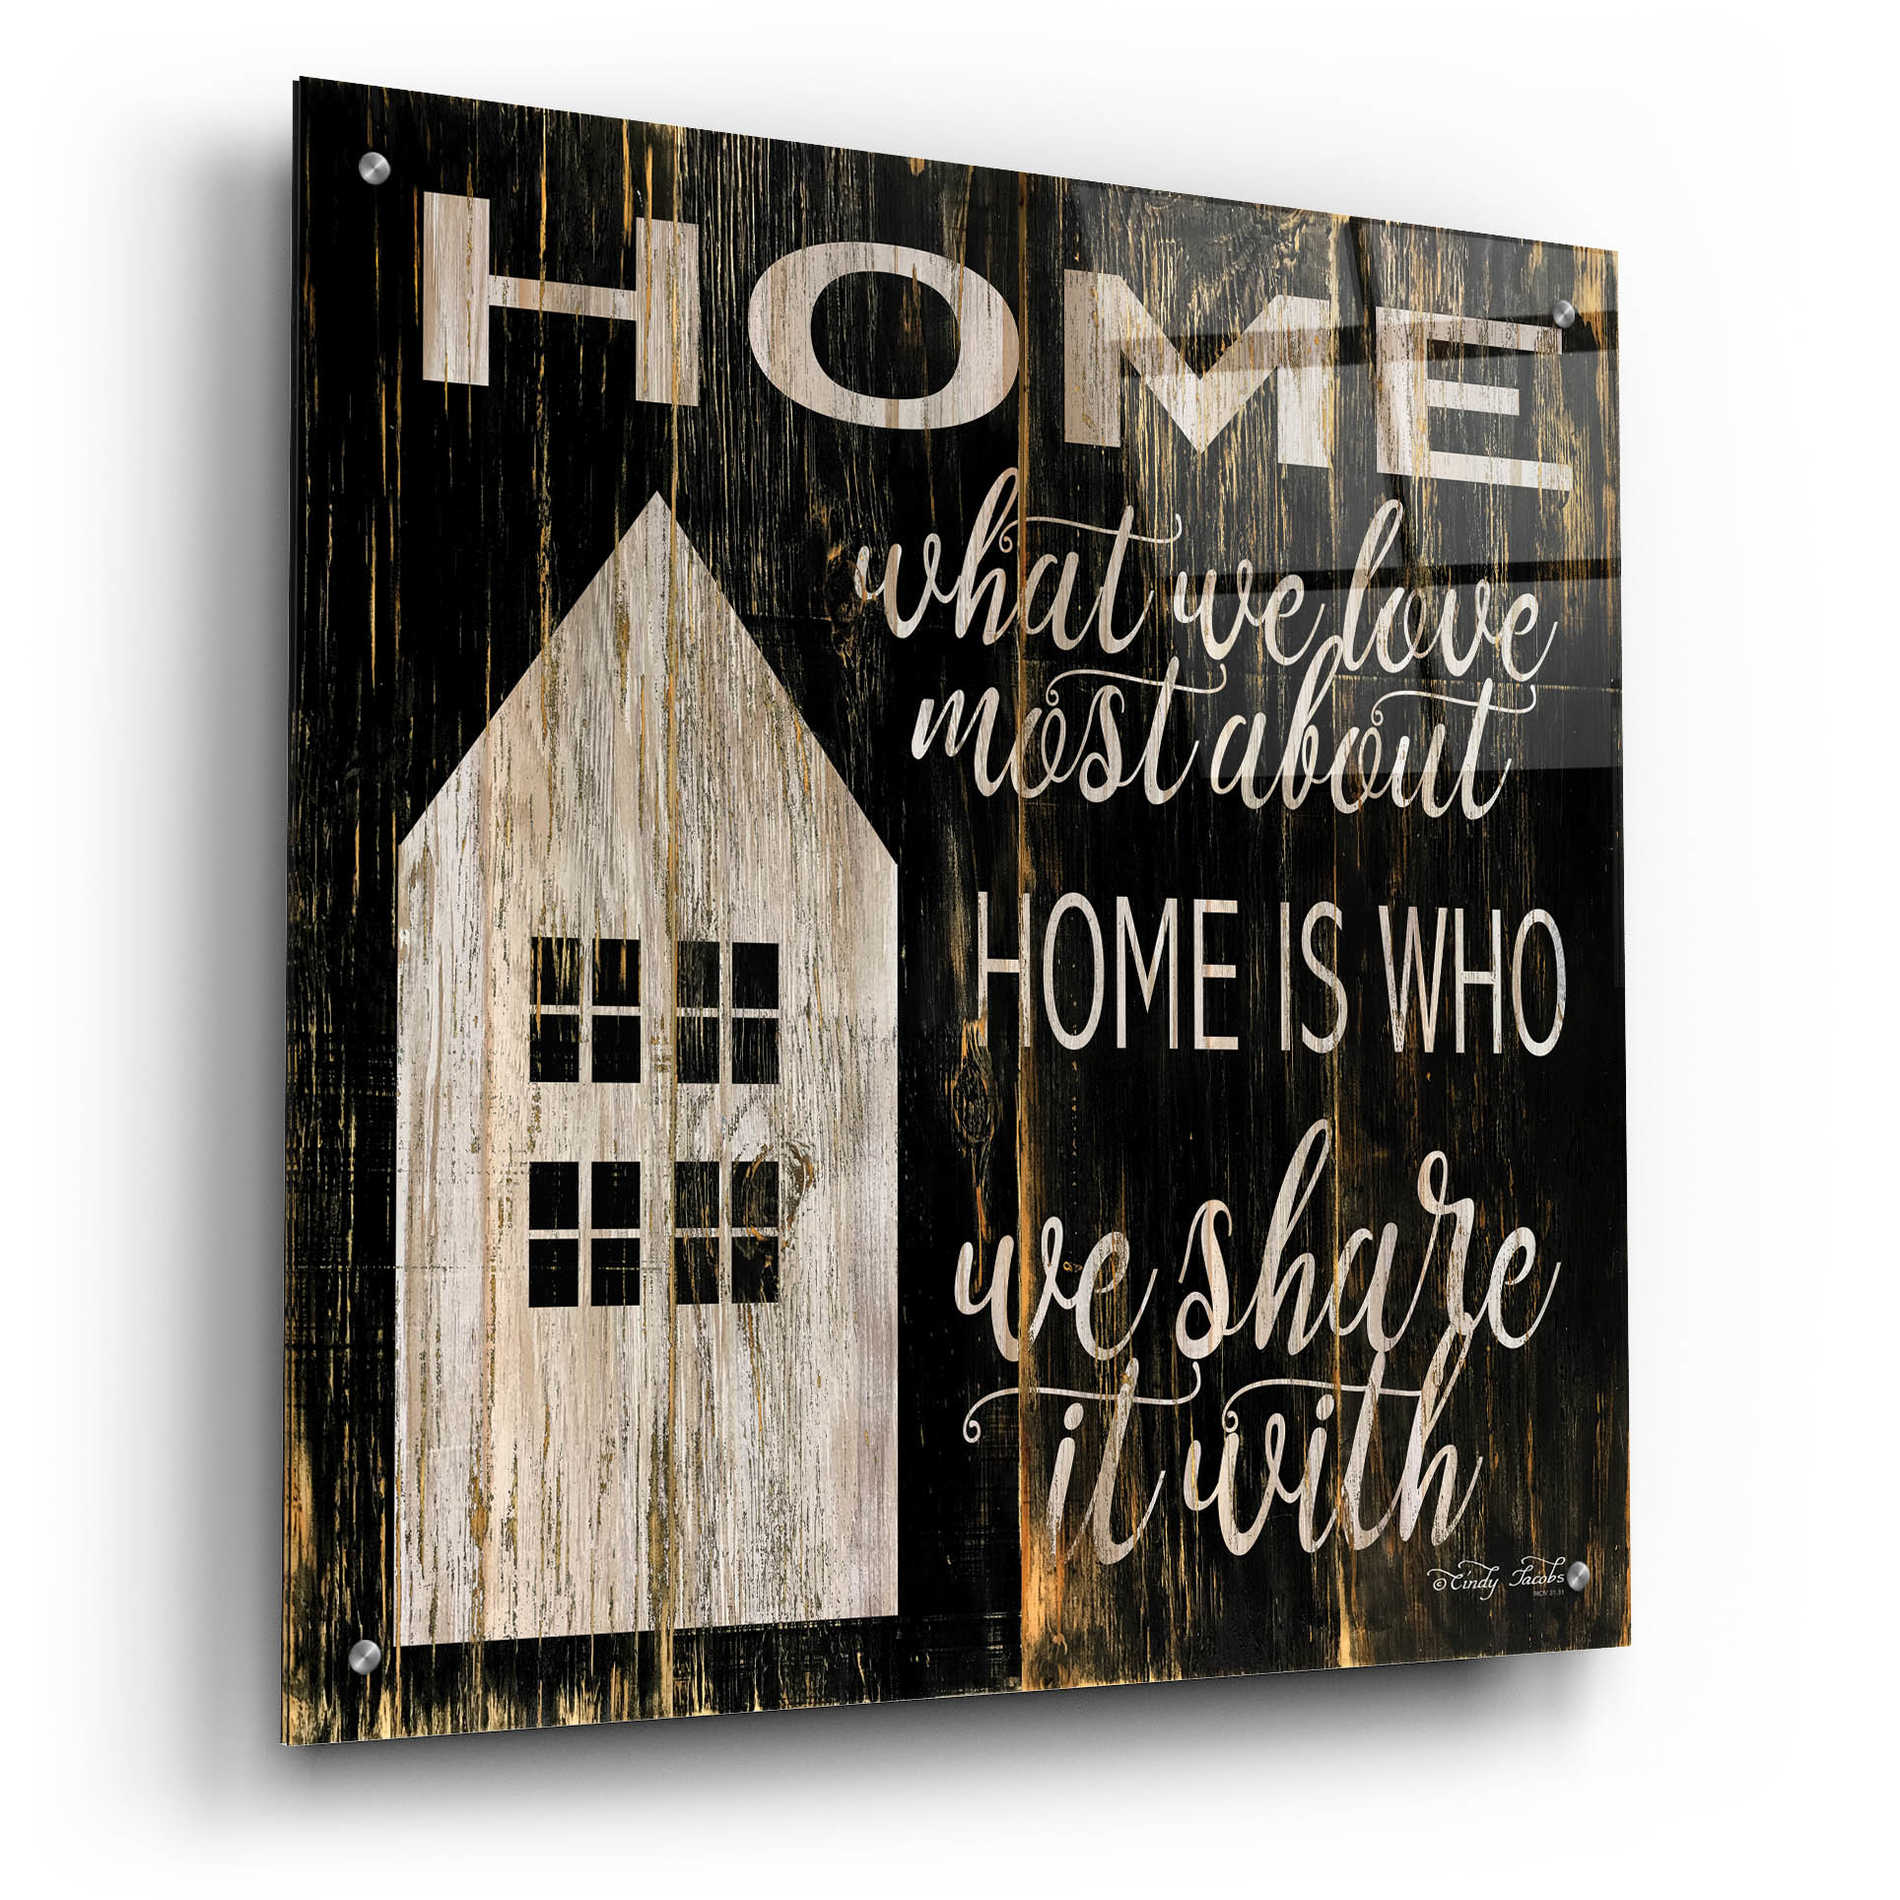 Epic Art 'Home is Who We Share It With' by Cindy Jacobs, Acrylic Glass Wall Art,24x24